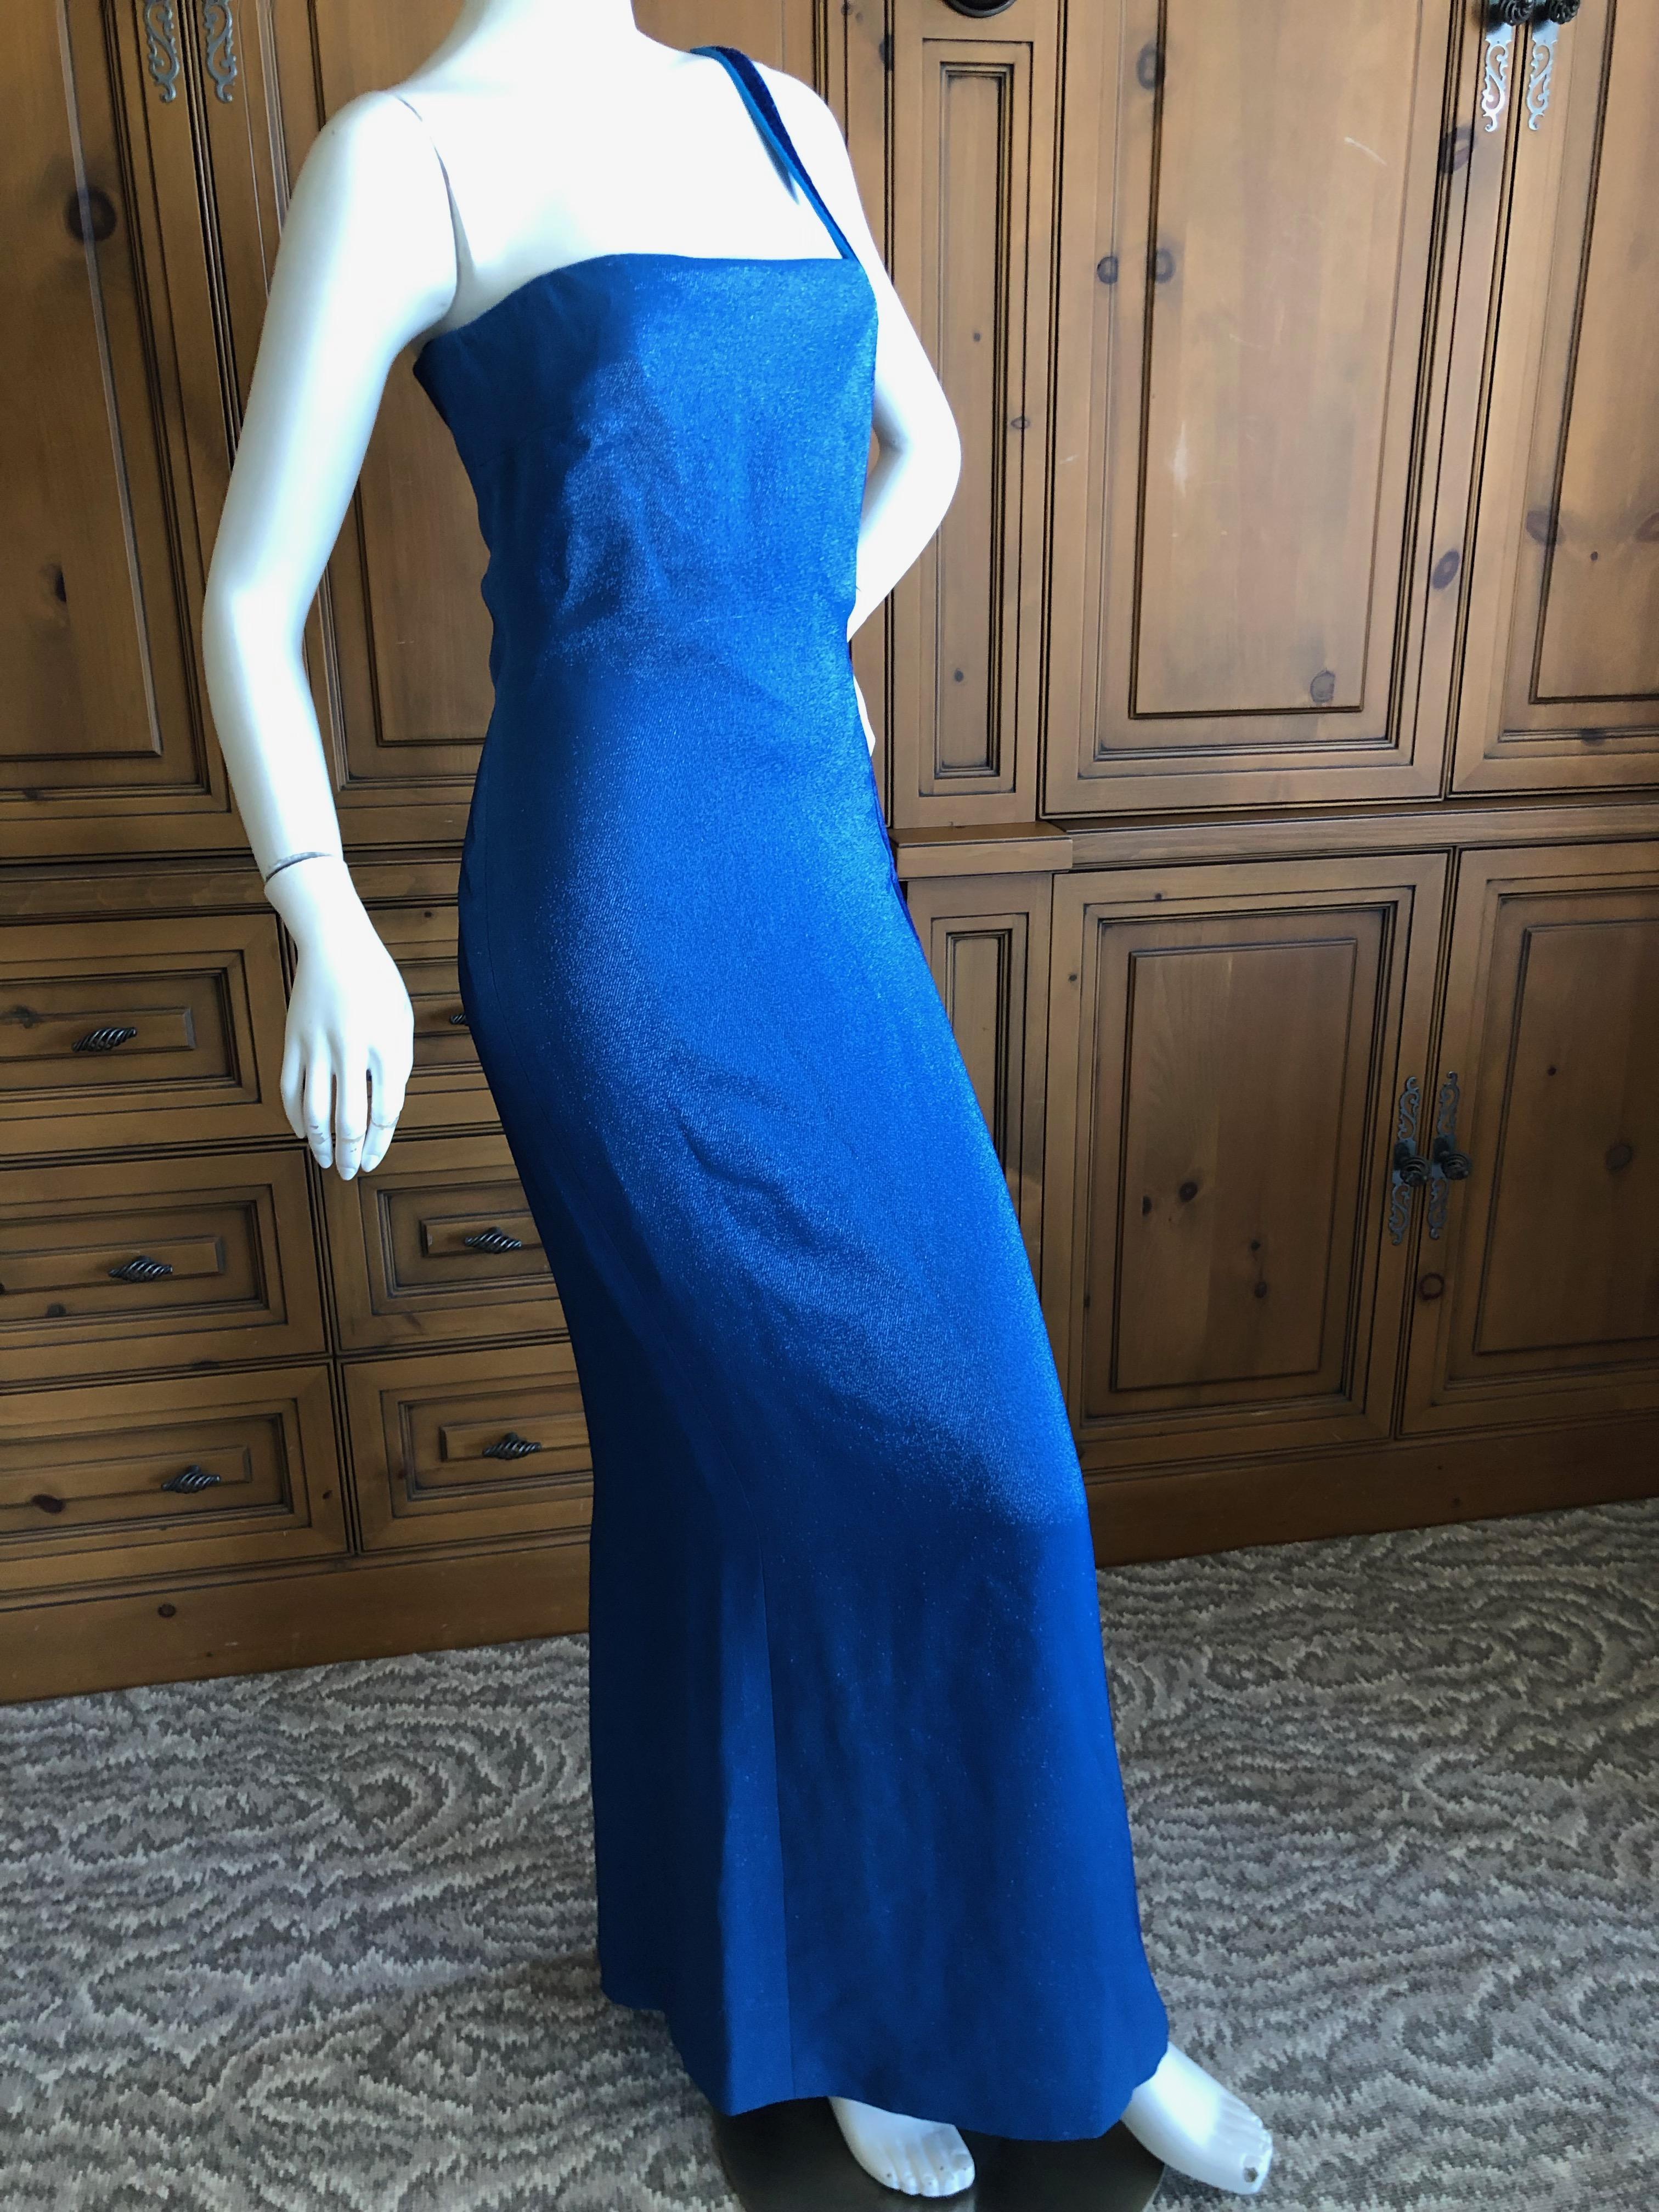 Gianni Versace Couture Vintage 80's Metallic Blue Evening Dress w Bugle Beads  For Sale 6